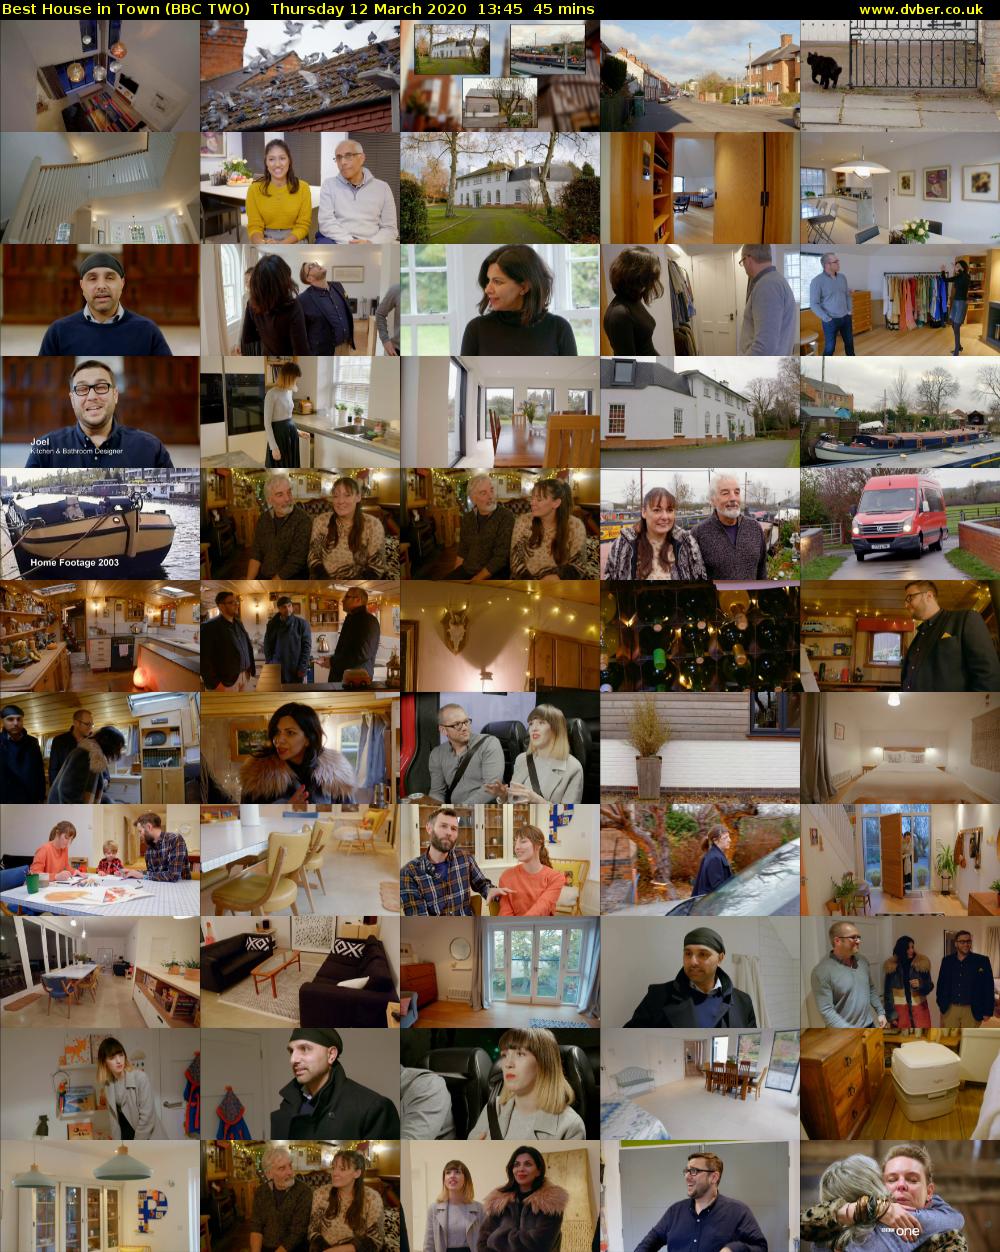 Best House in Town (BBC TWO) Thursday 12 March 2020 13:45 - 14:30